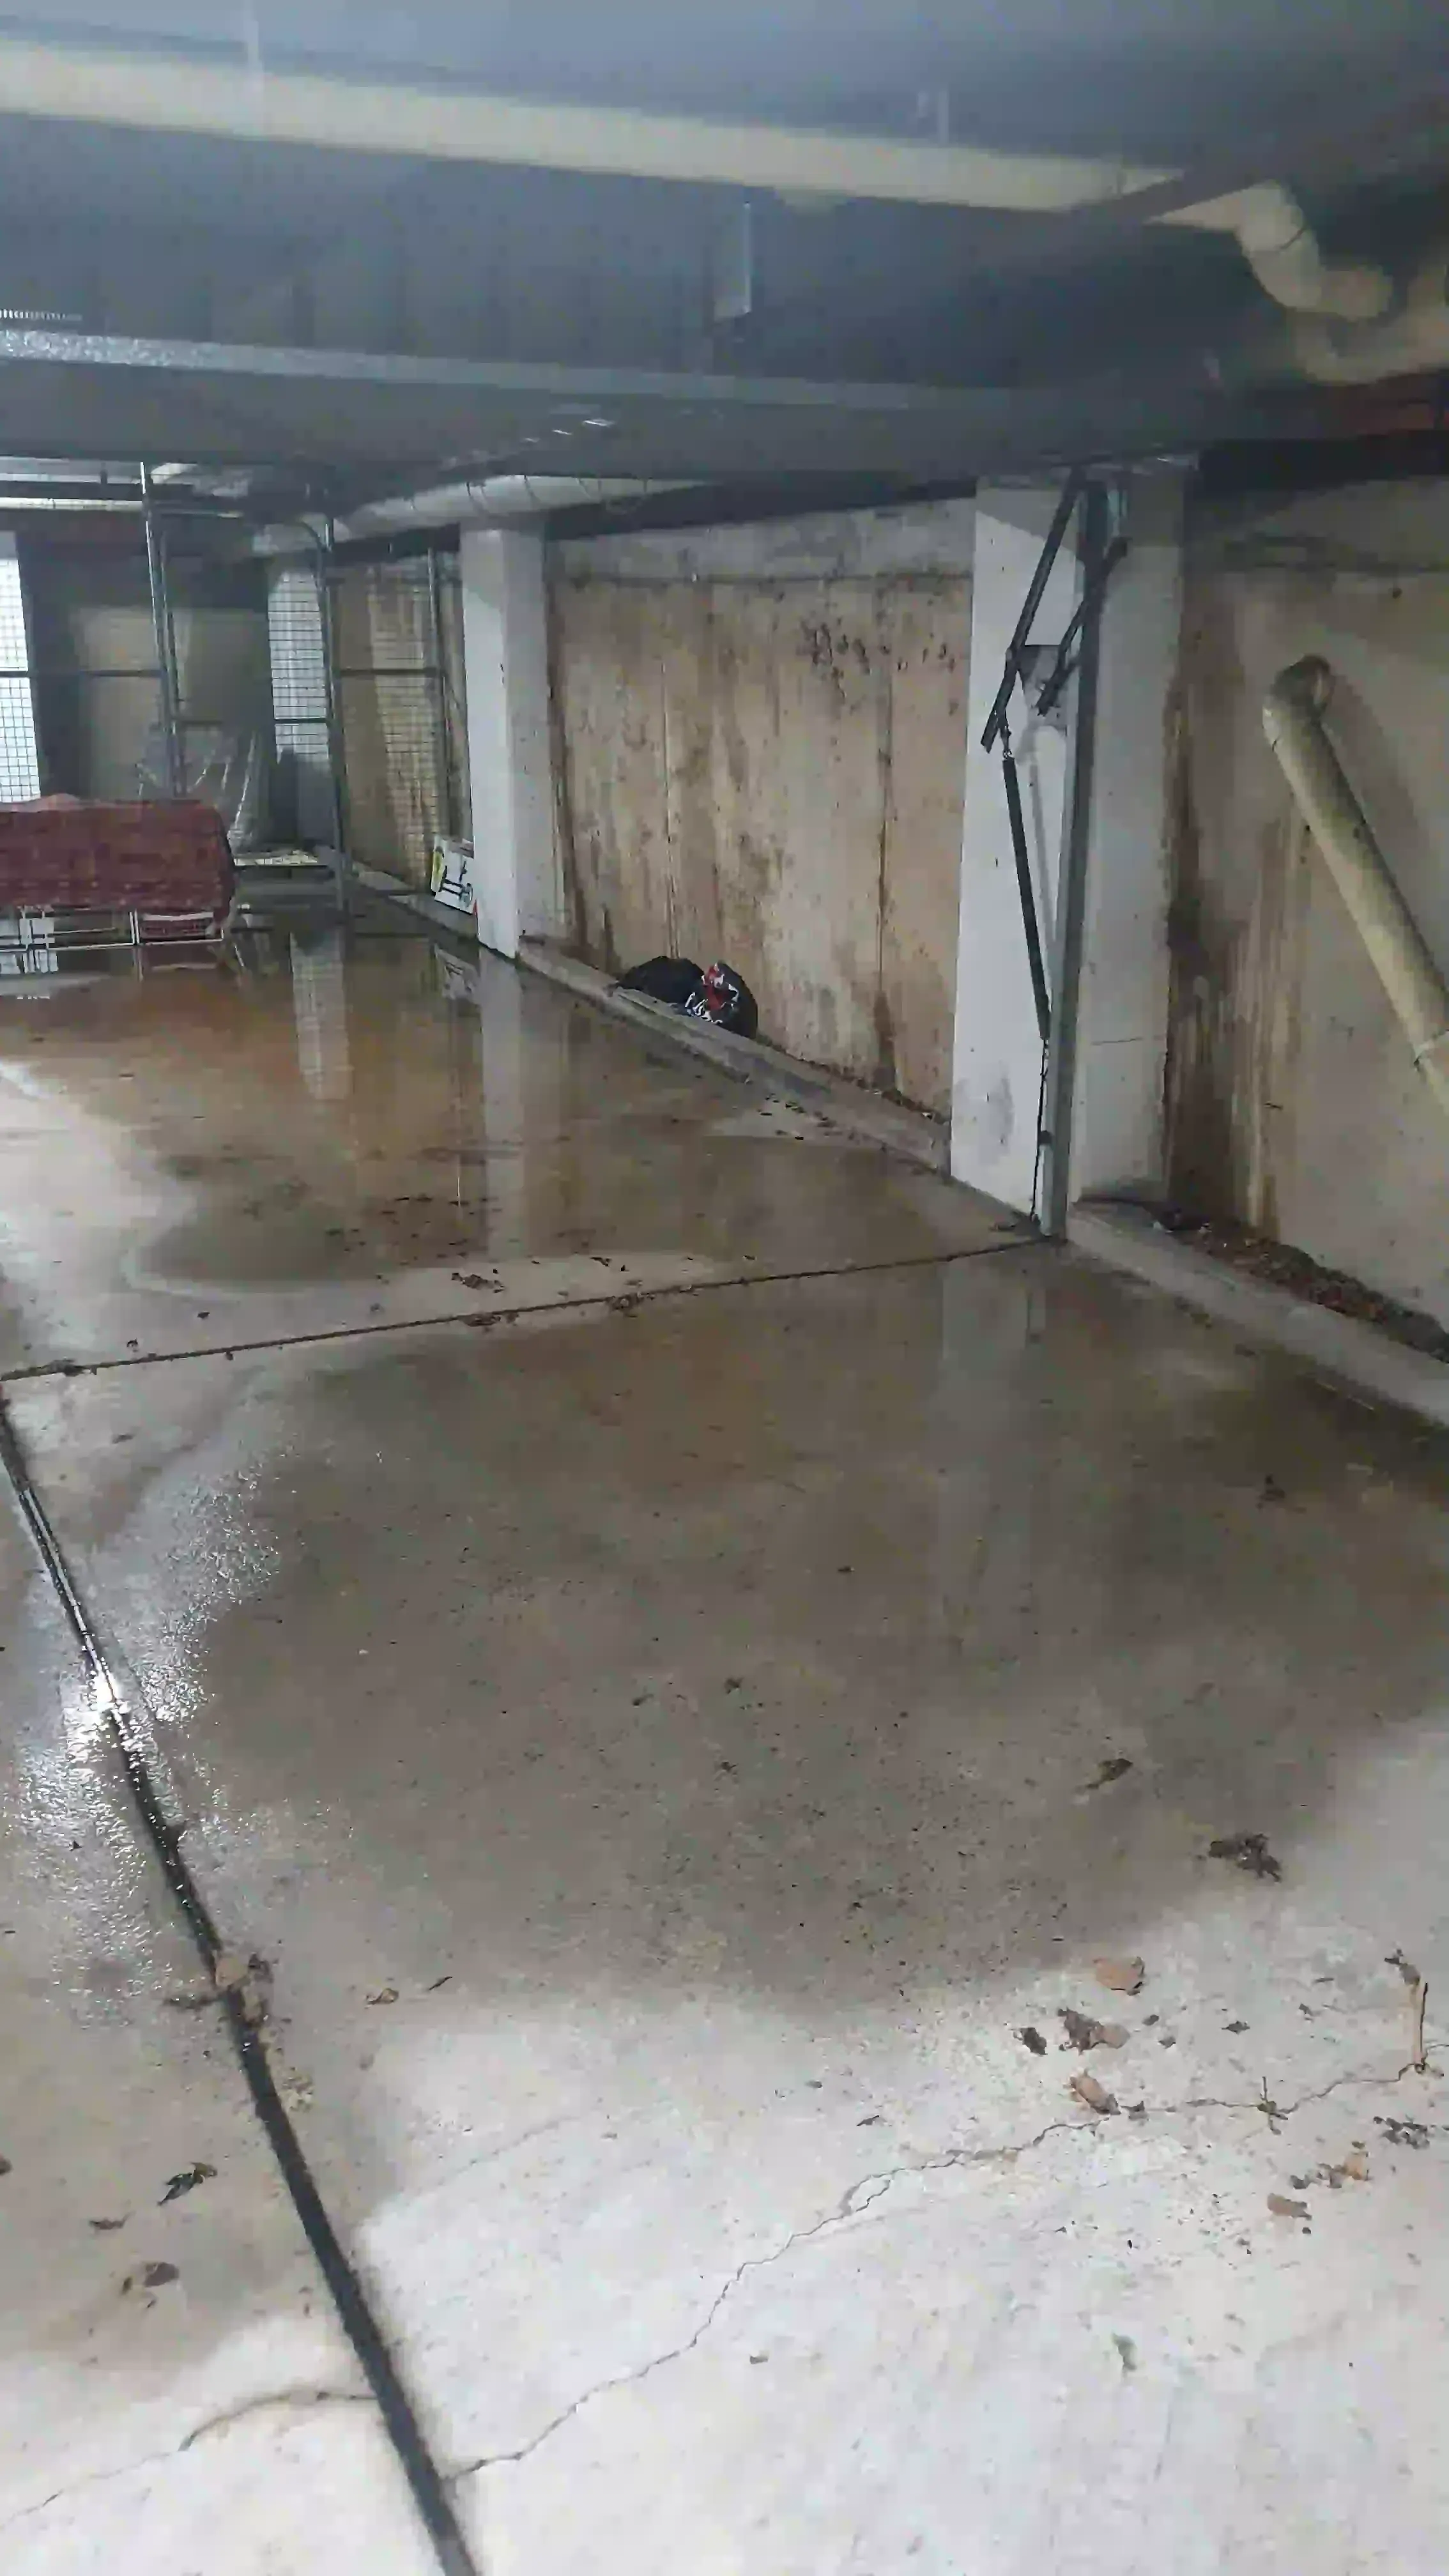 SP52948-examples-of-water-leakages-in-basement-and-garages-photo-32-22Feb2022.webp